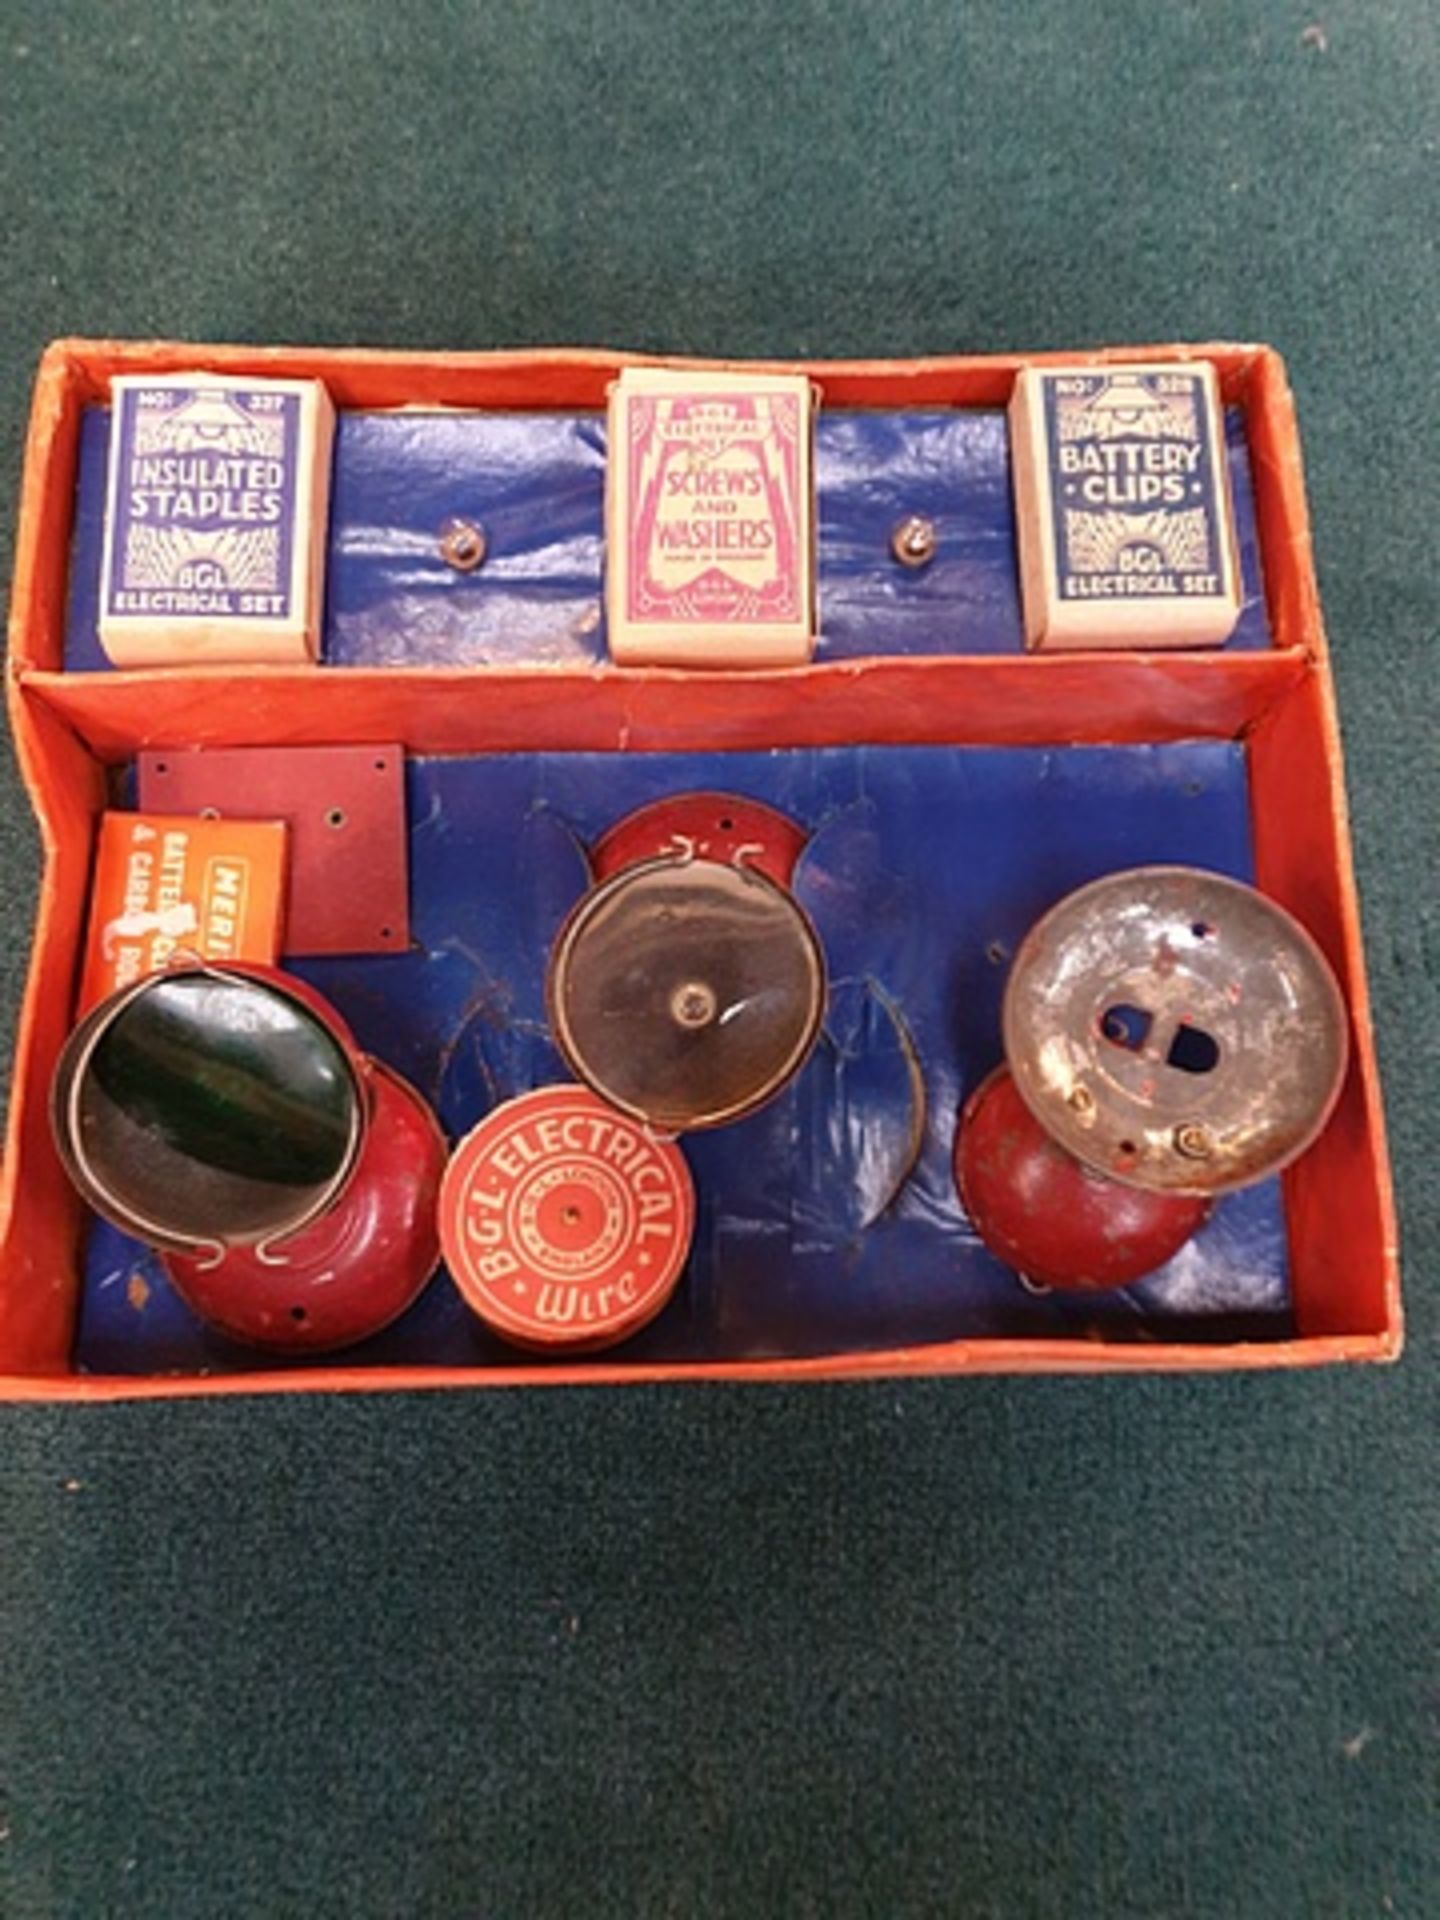 B.G.L. Floodlight Set - English Made, Boxed And Complete To Enable You To "See Your Toys Floodlit - Image 2 of 2